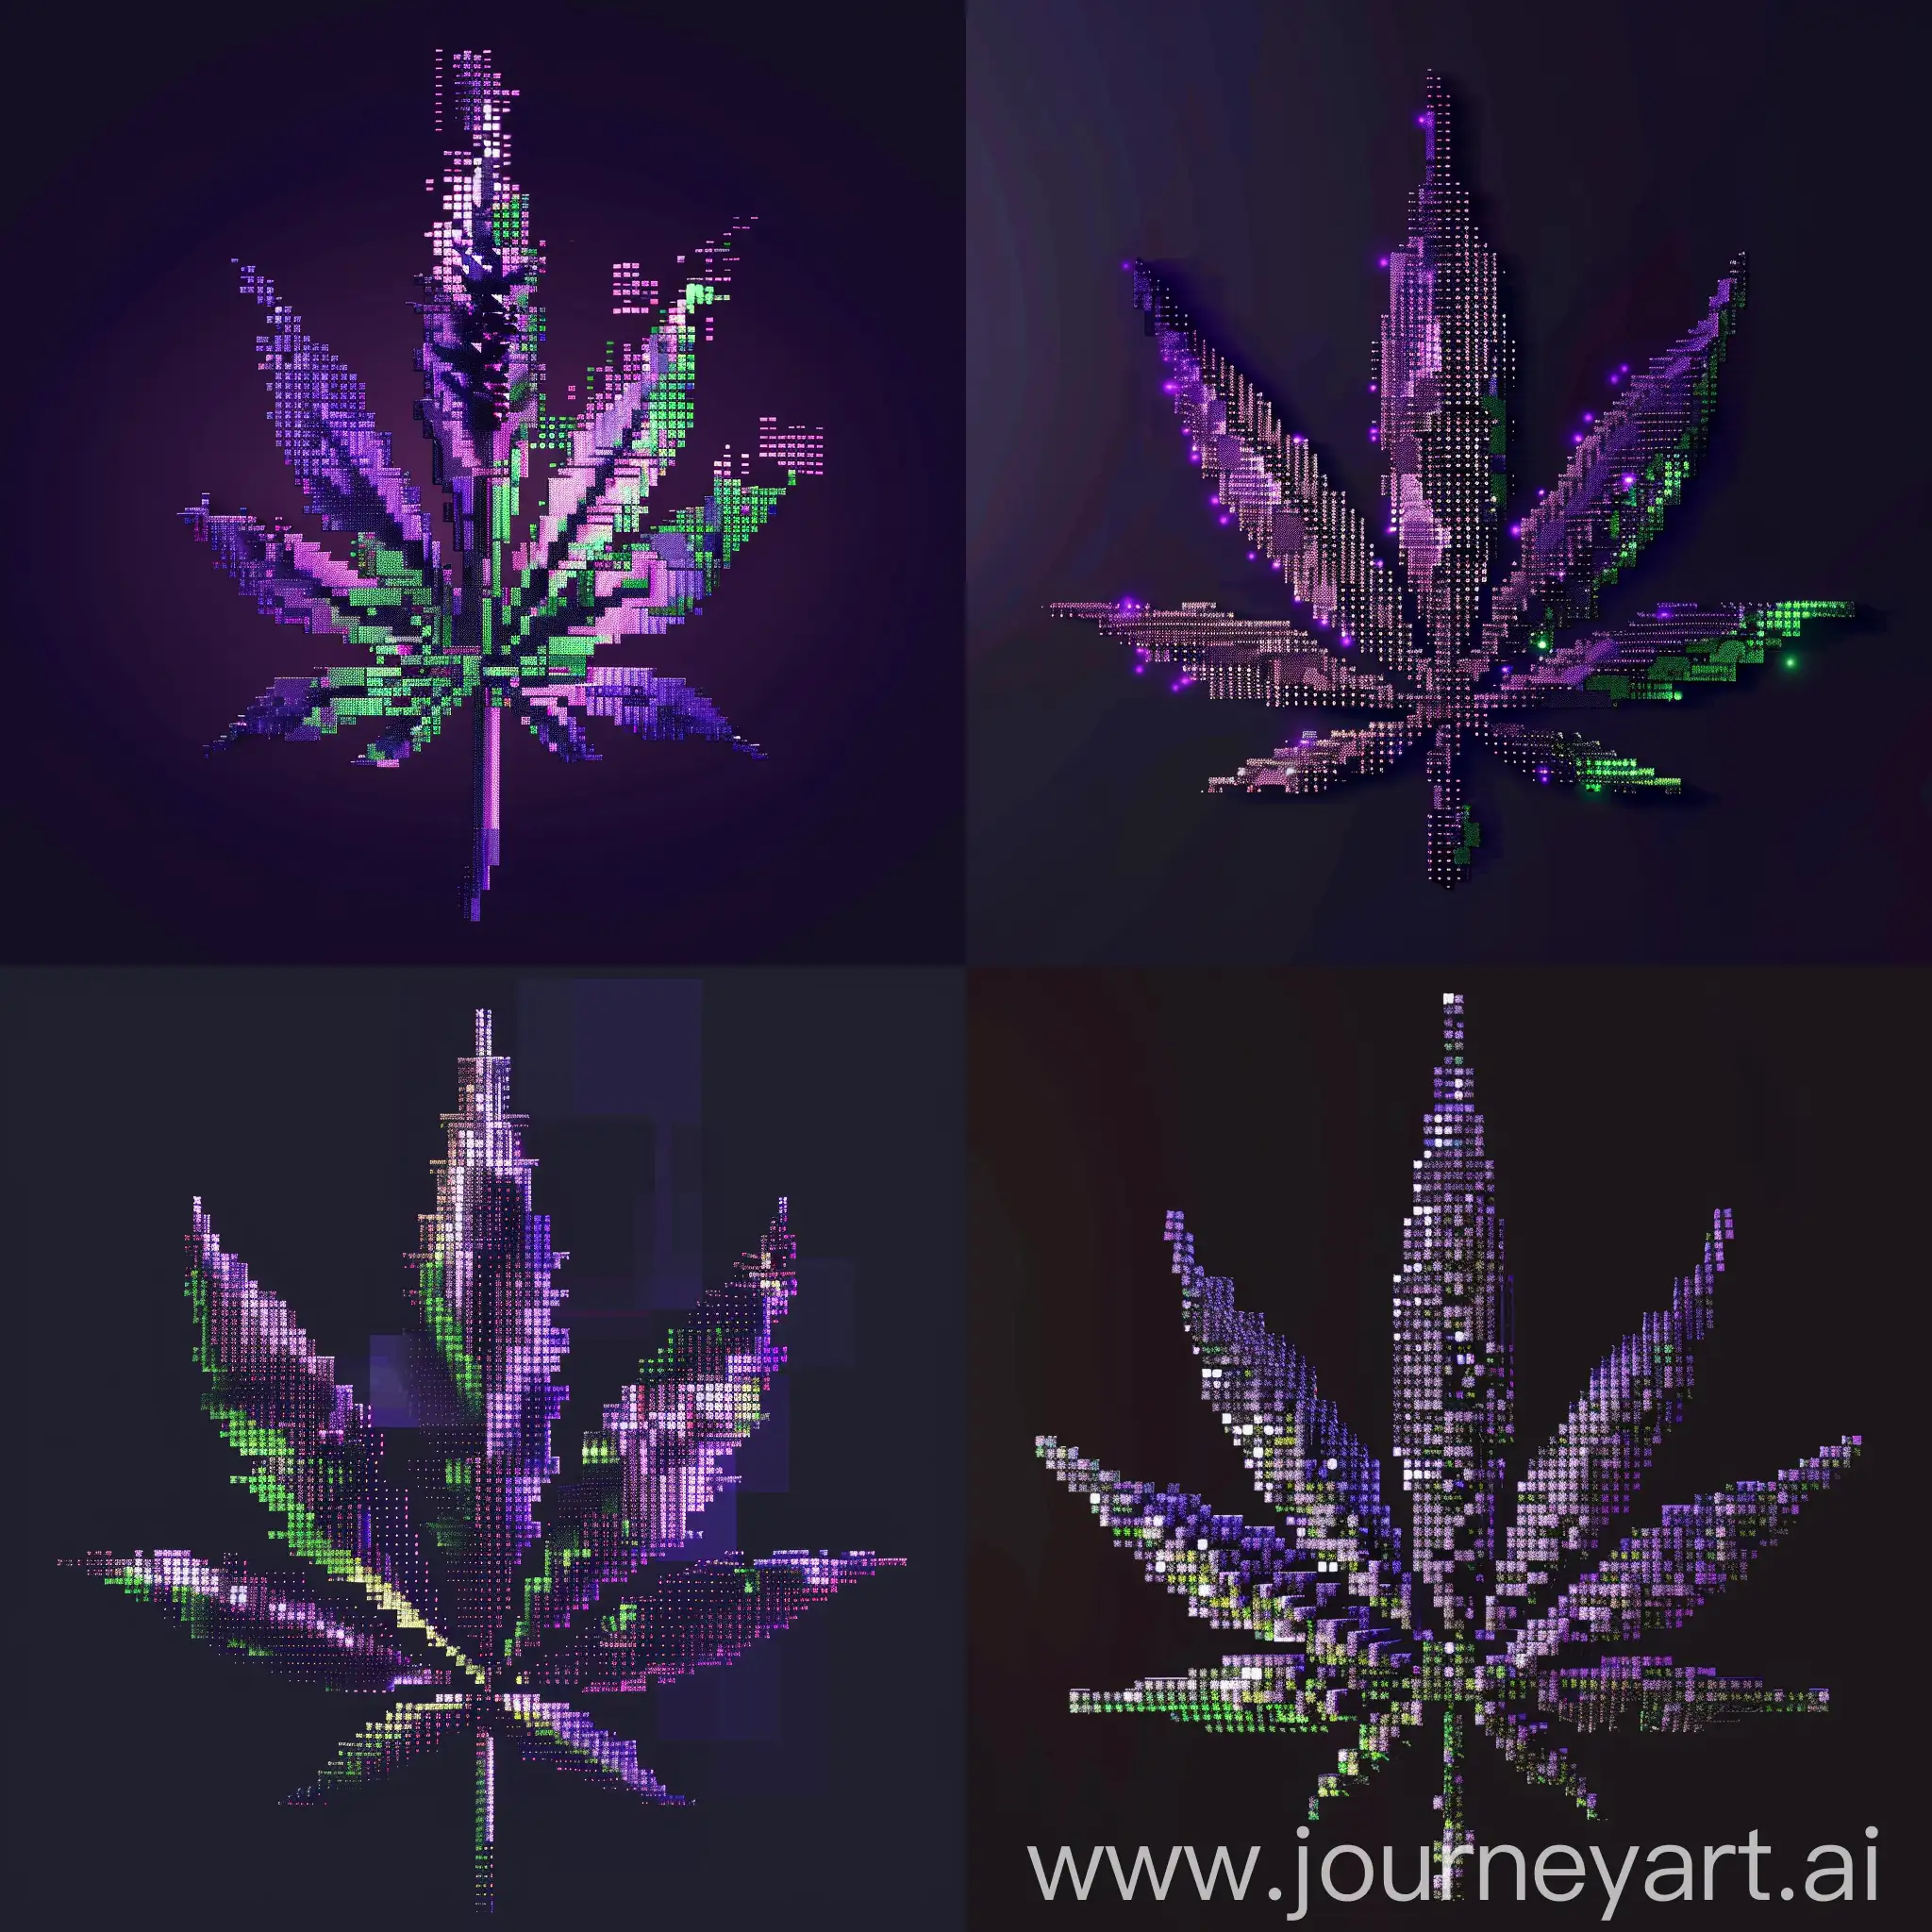 a crpyto token logo that is a pixelated 3D marihuana leaf in purple and green colors